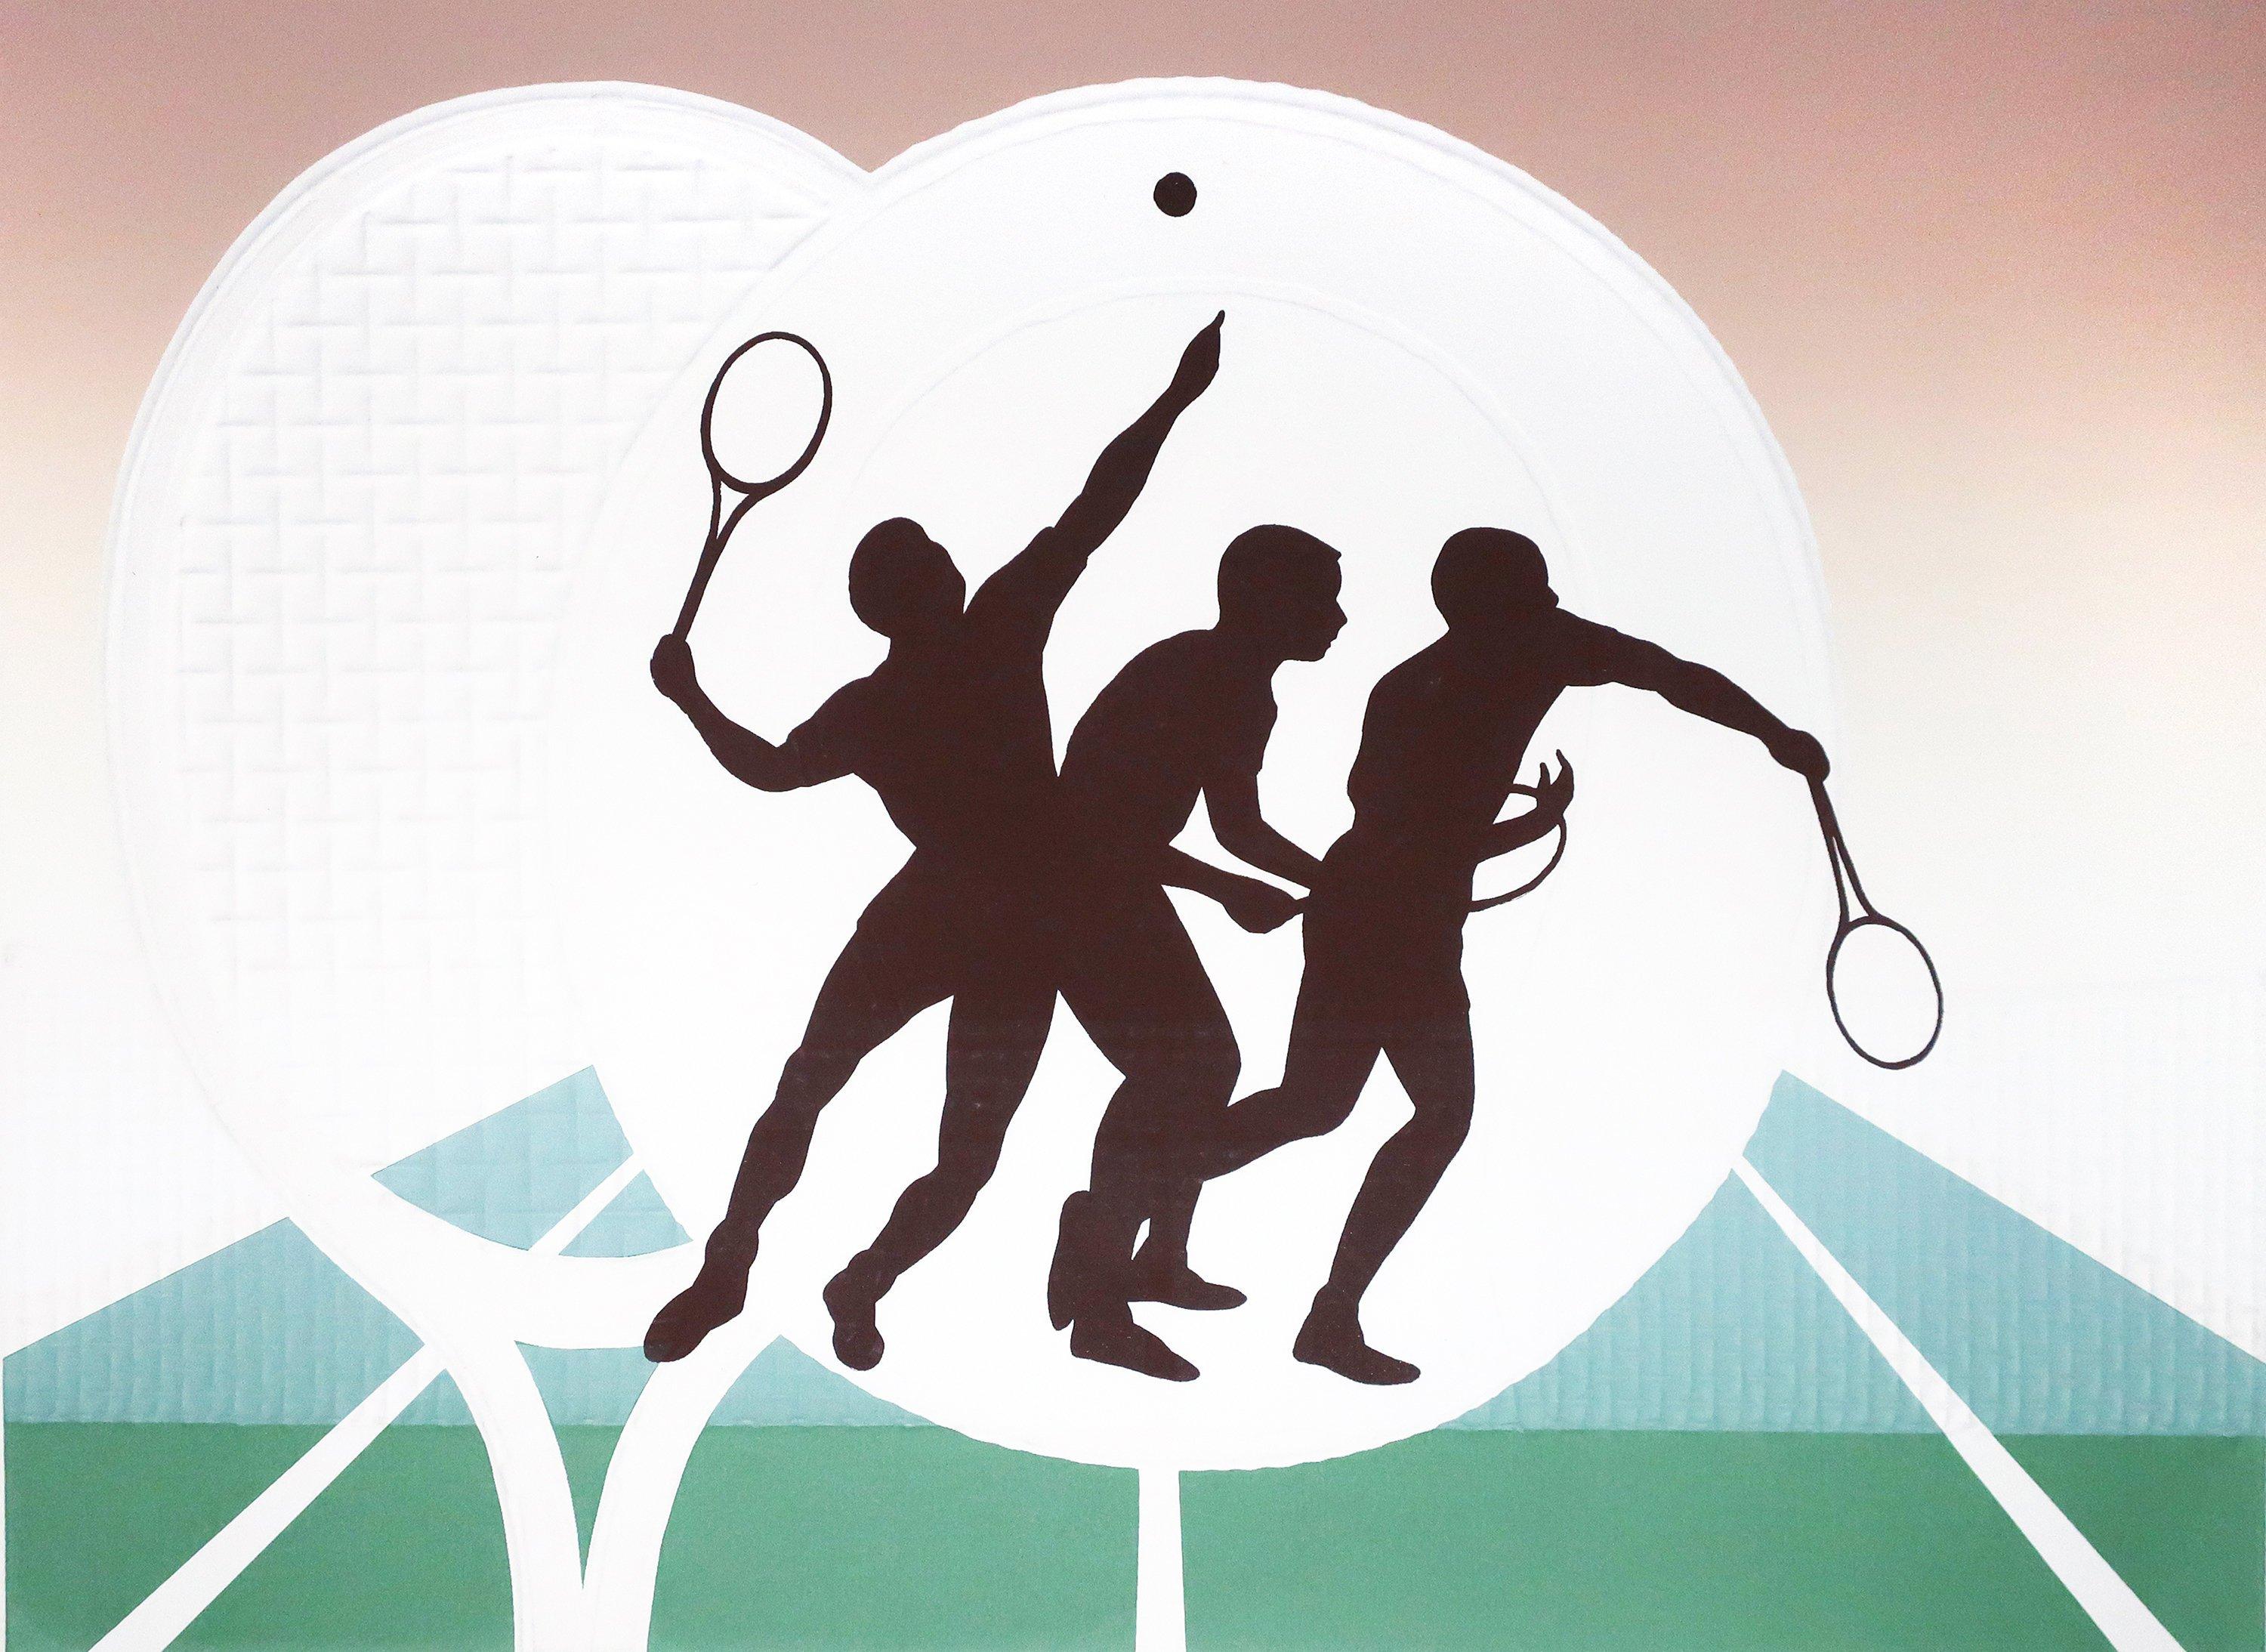 A Mid-Century Modern serigraph depicting a silhouetted tennis player against an embossed tennis net, racquet and ball. Amazing gift for any tennis fan!

The paper is 21.5